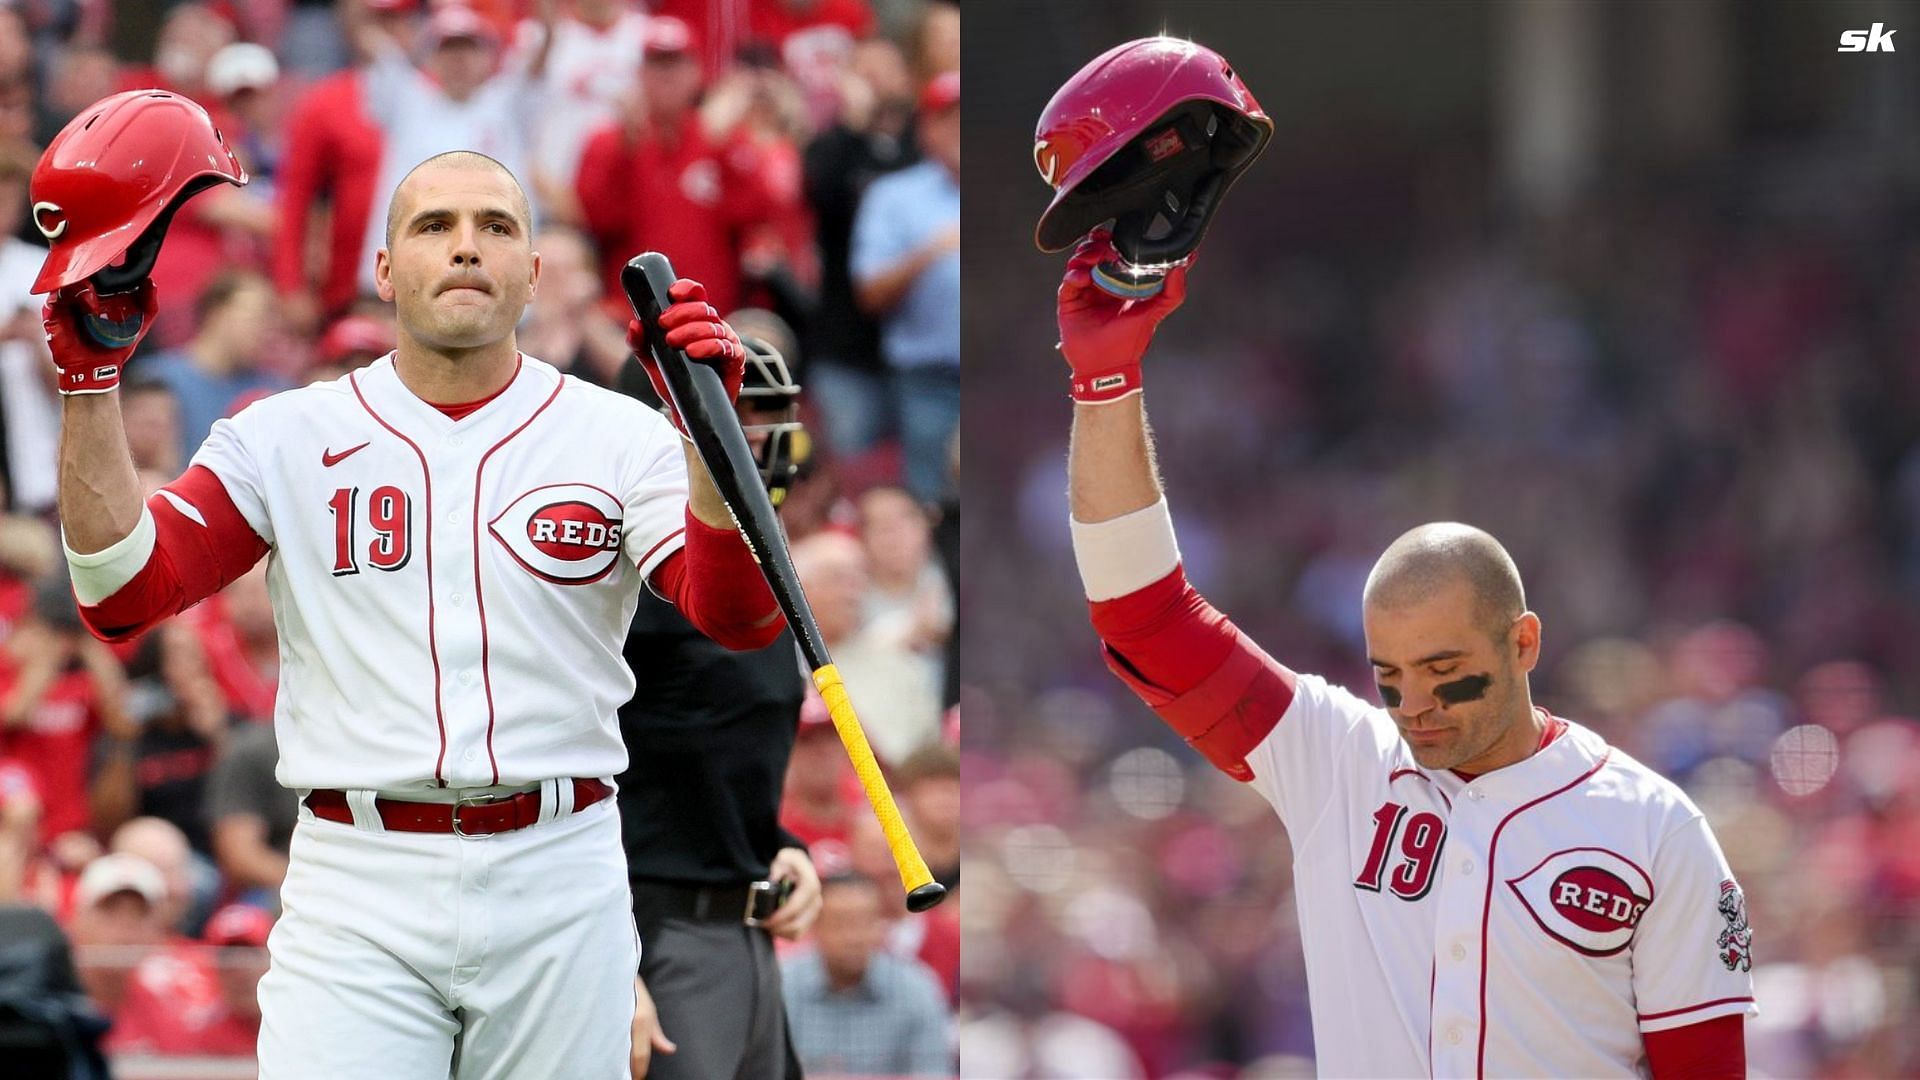 Joey Votto gets teary eyed as he bids adieu to the Reds fanbase